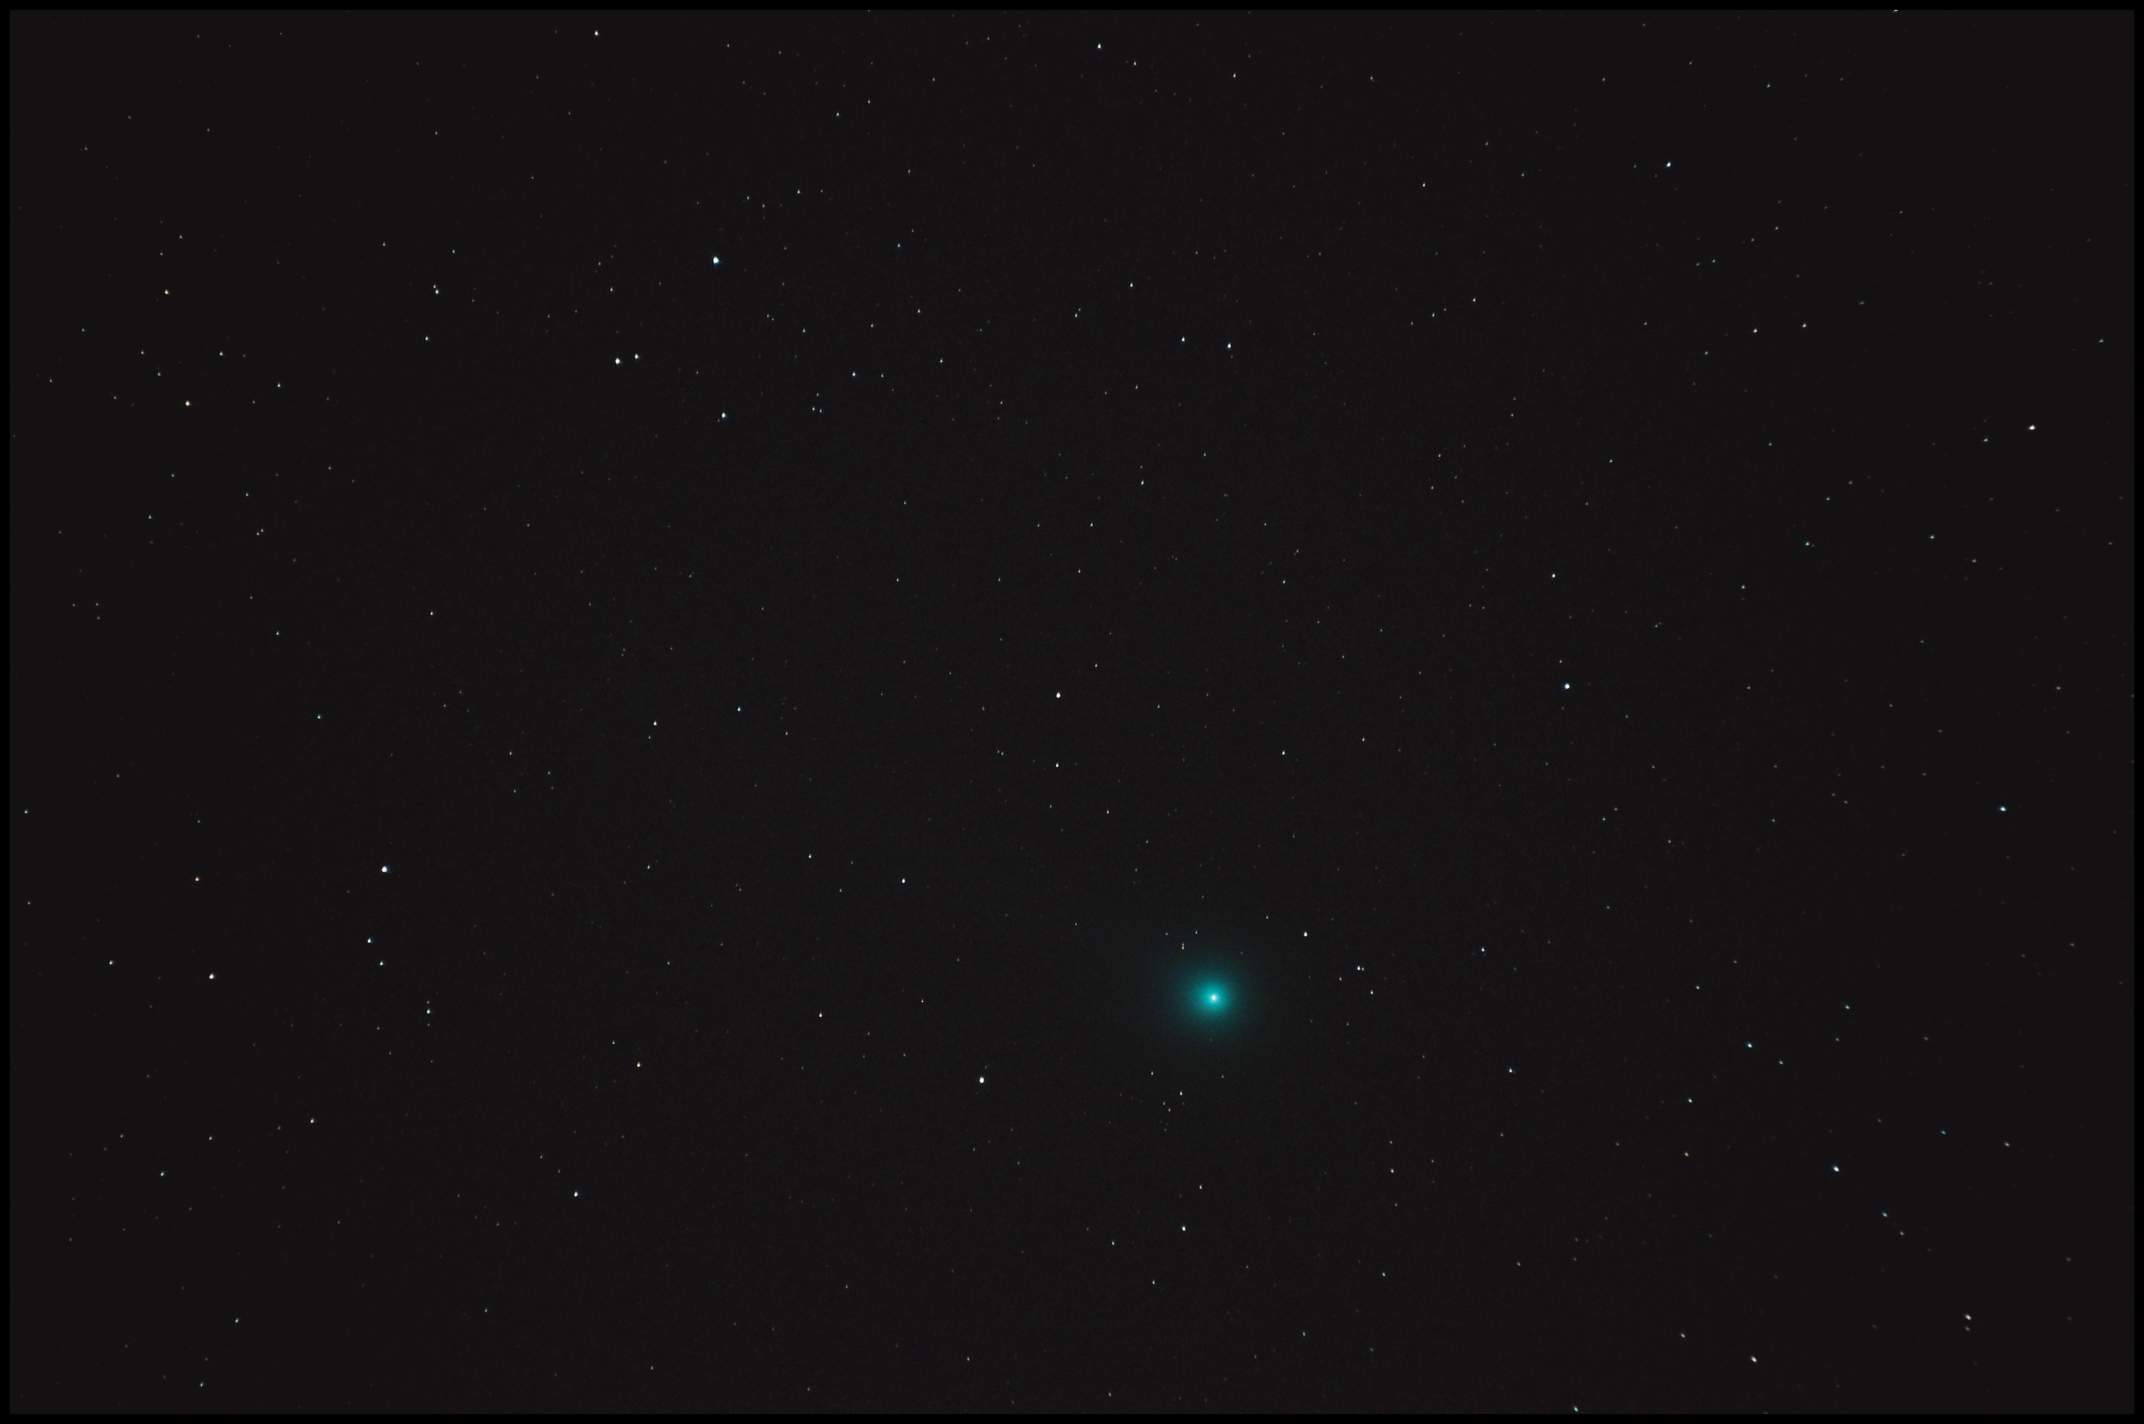 Lovejoy 270mm 2x30s ISO 3200 1